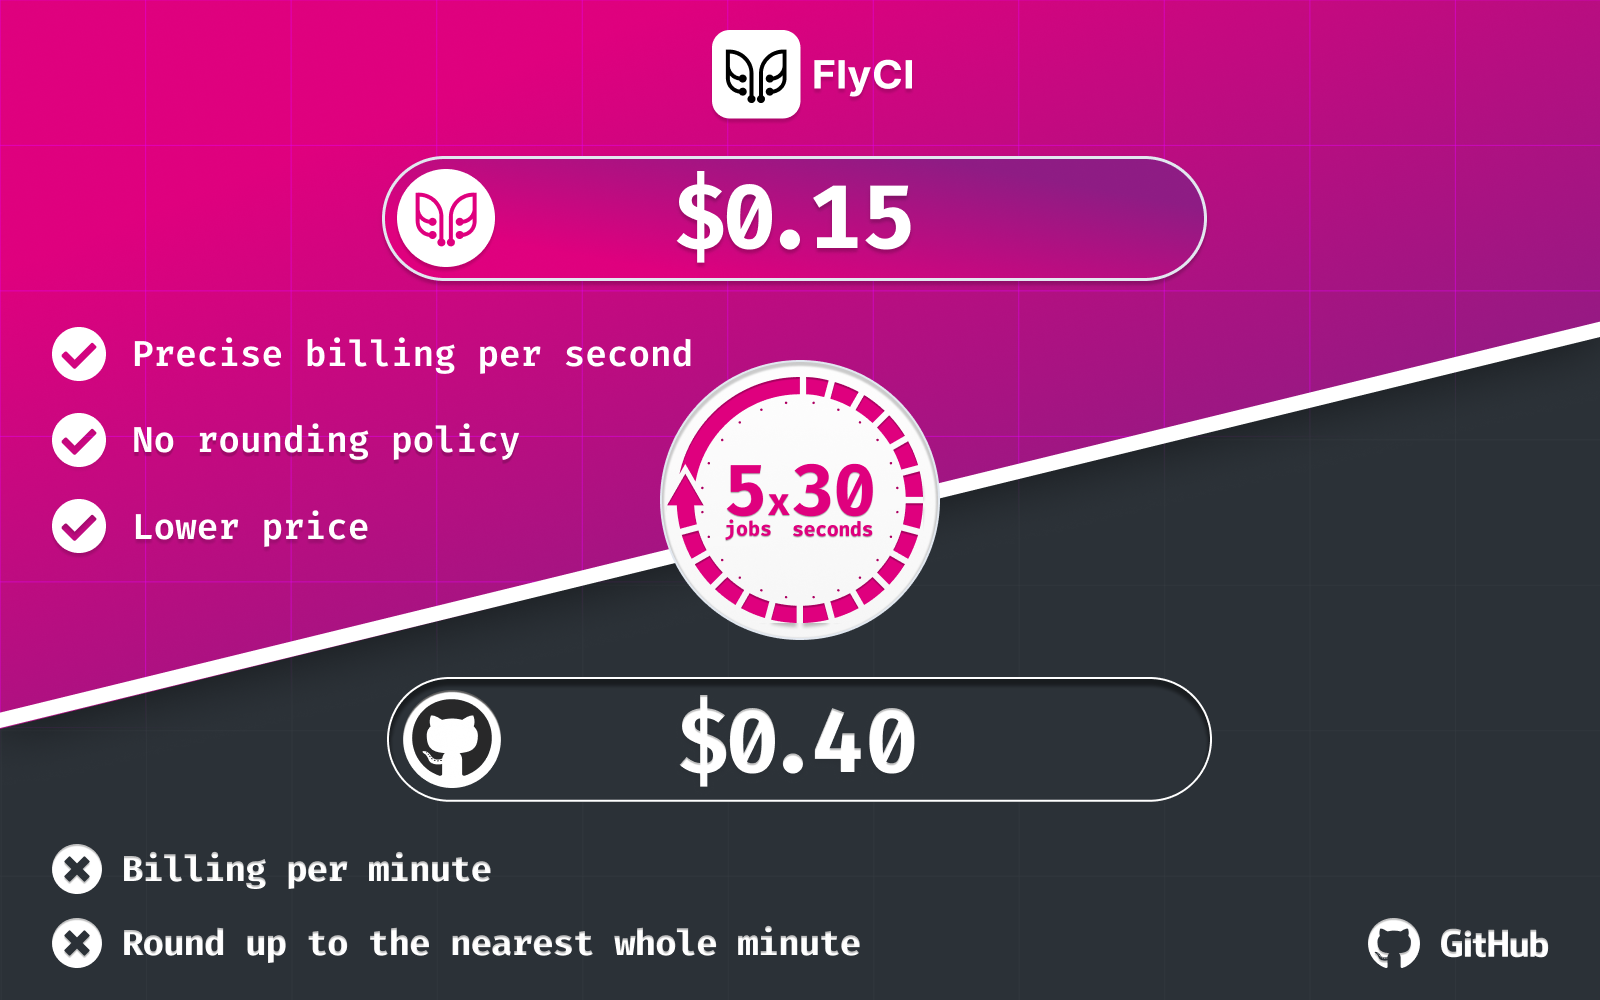 The benefits of FlyCI billing - precise billing per second, no rounding policy, lower price and and an example of $0.15 for a workflow having 5 jobs per 30 seconds each. All this is compared to GitHub's price of $0.40 for the same workflow with disadvantages outlined - Billing per minute and rounding up to the nearest whole minute.